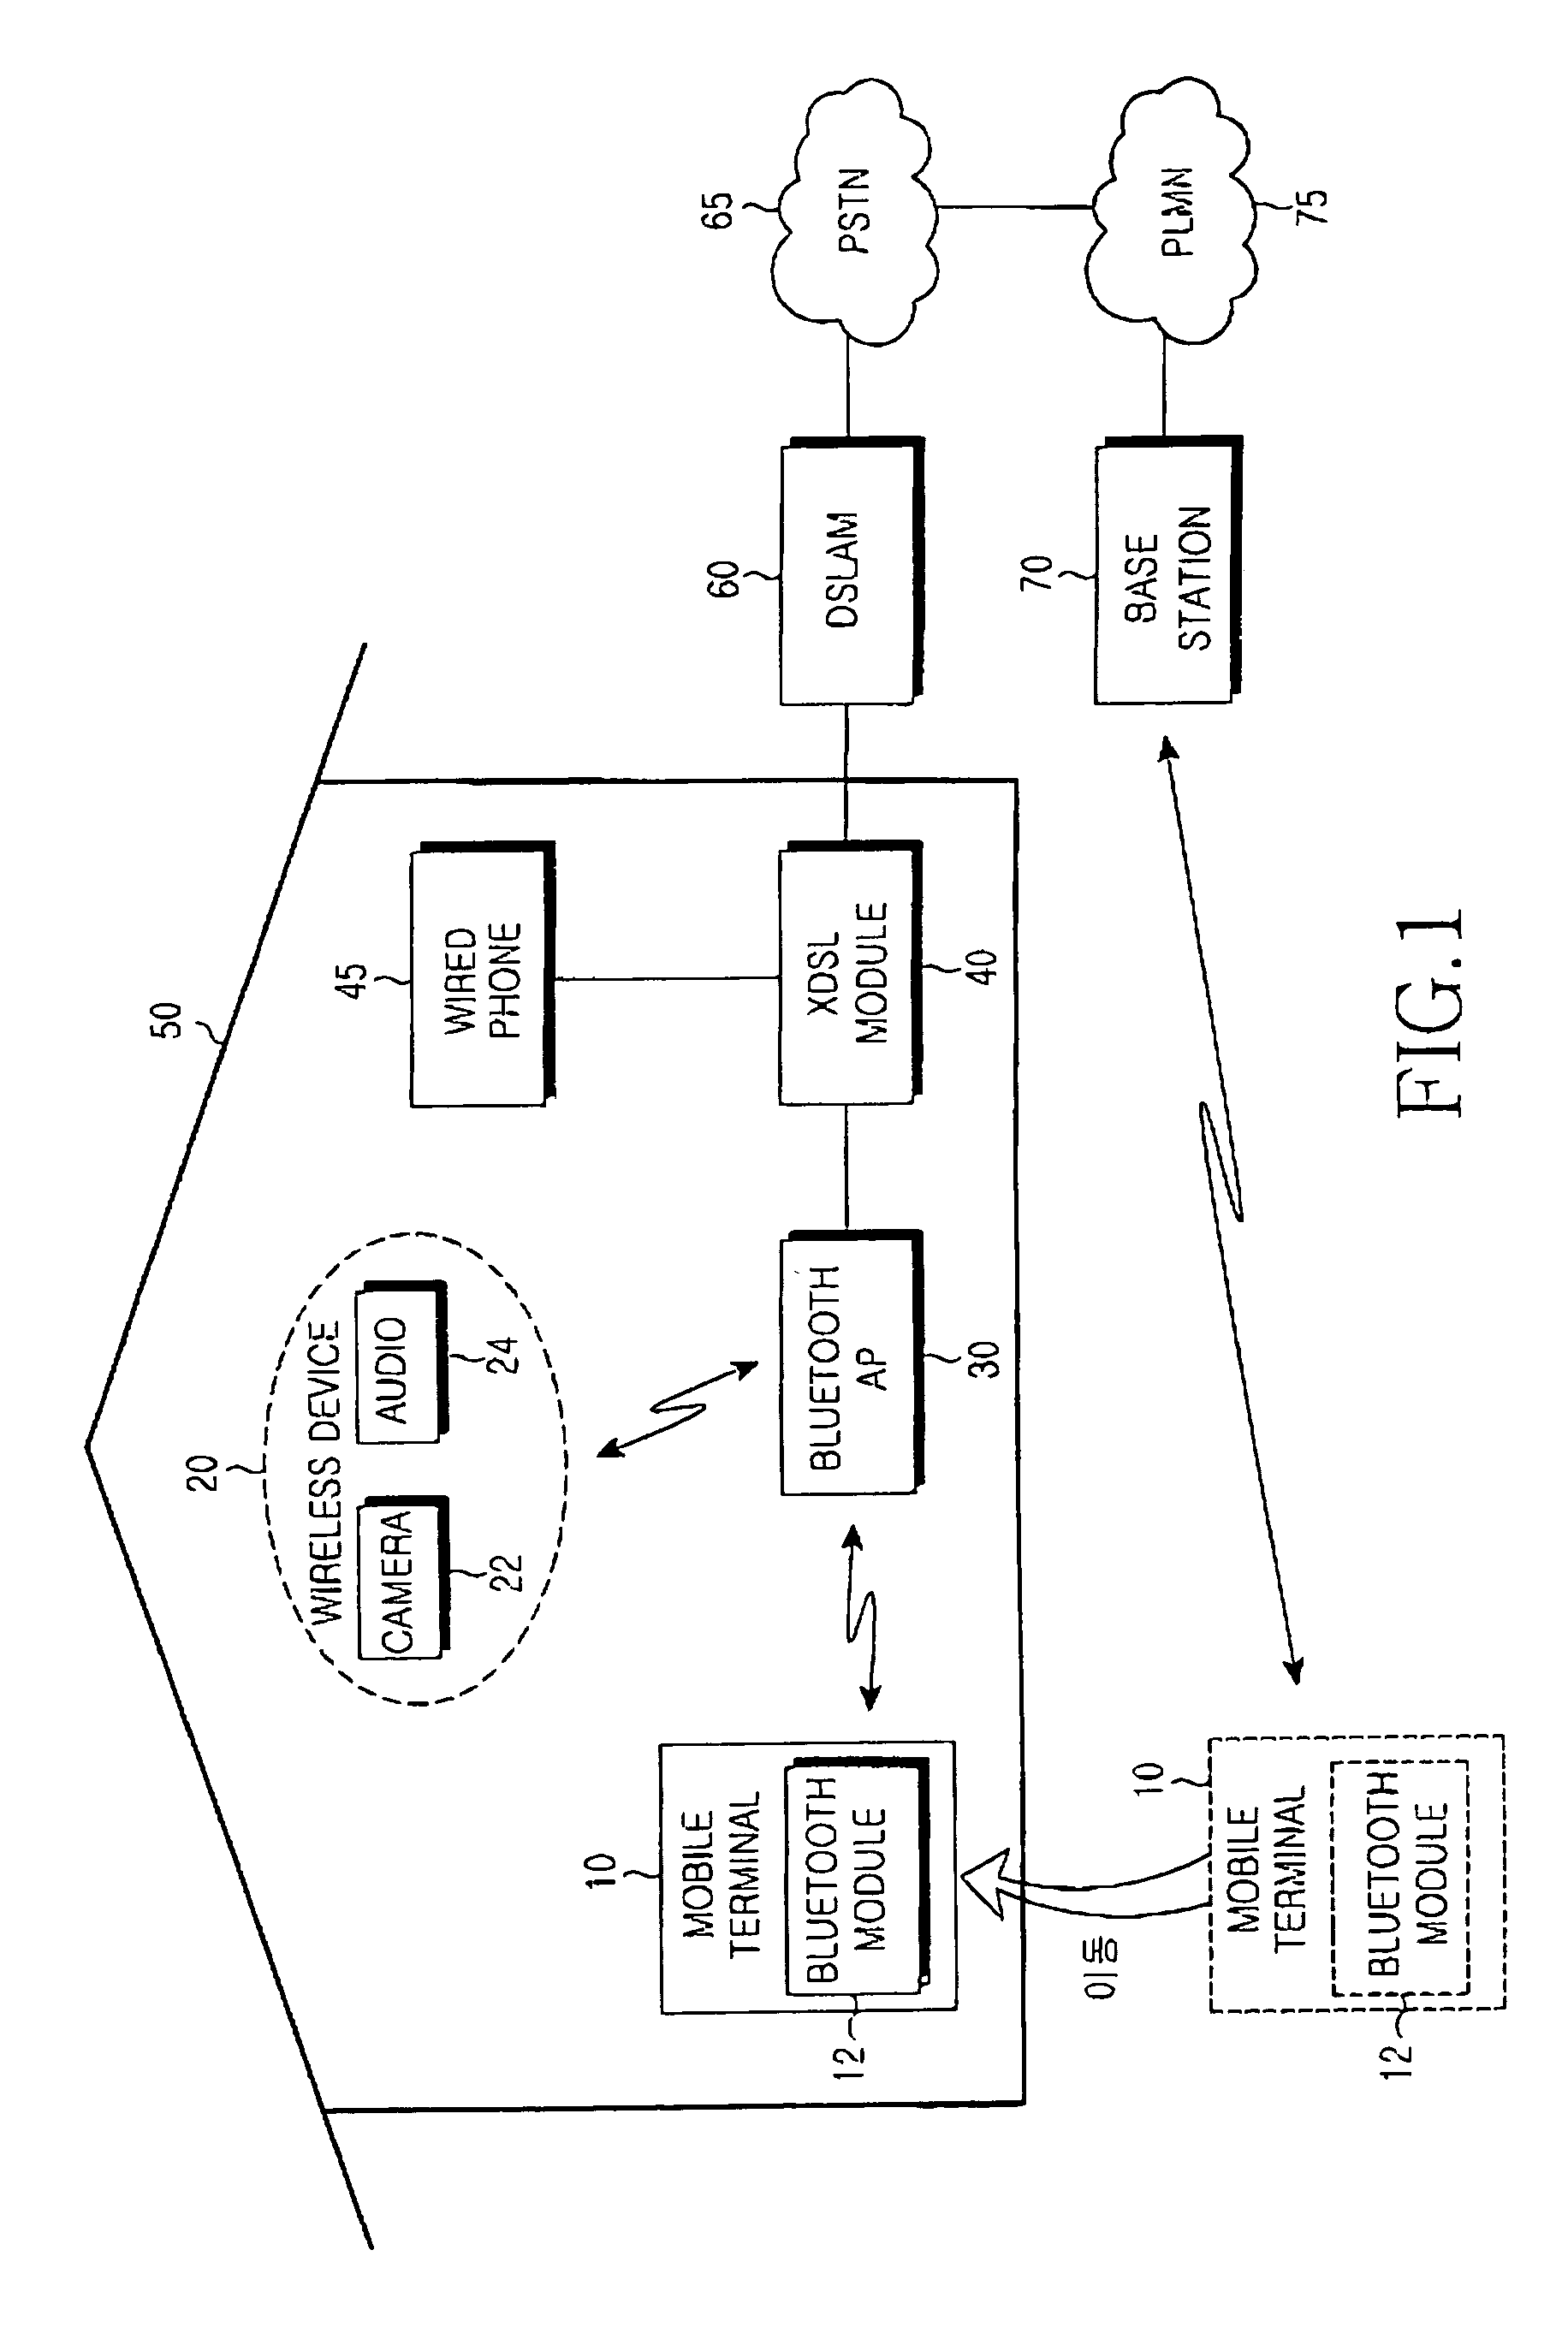 Method of connecting a mobile terminal including a bluetooth module and a bluetooth access point